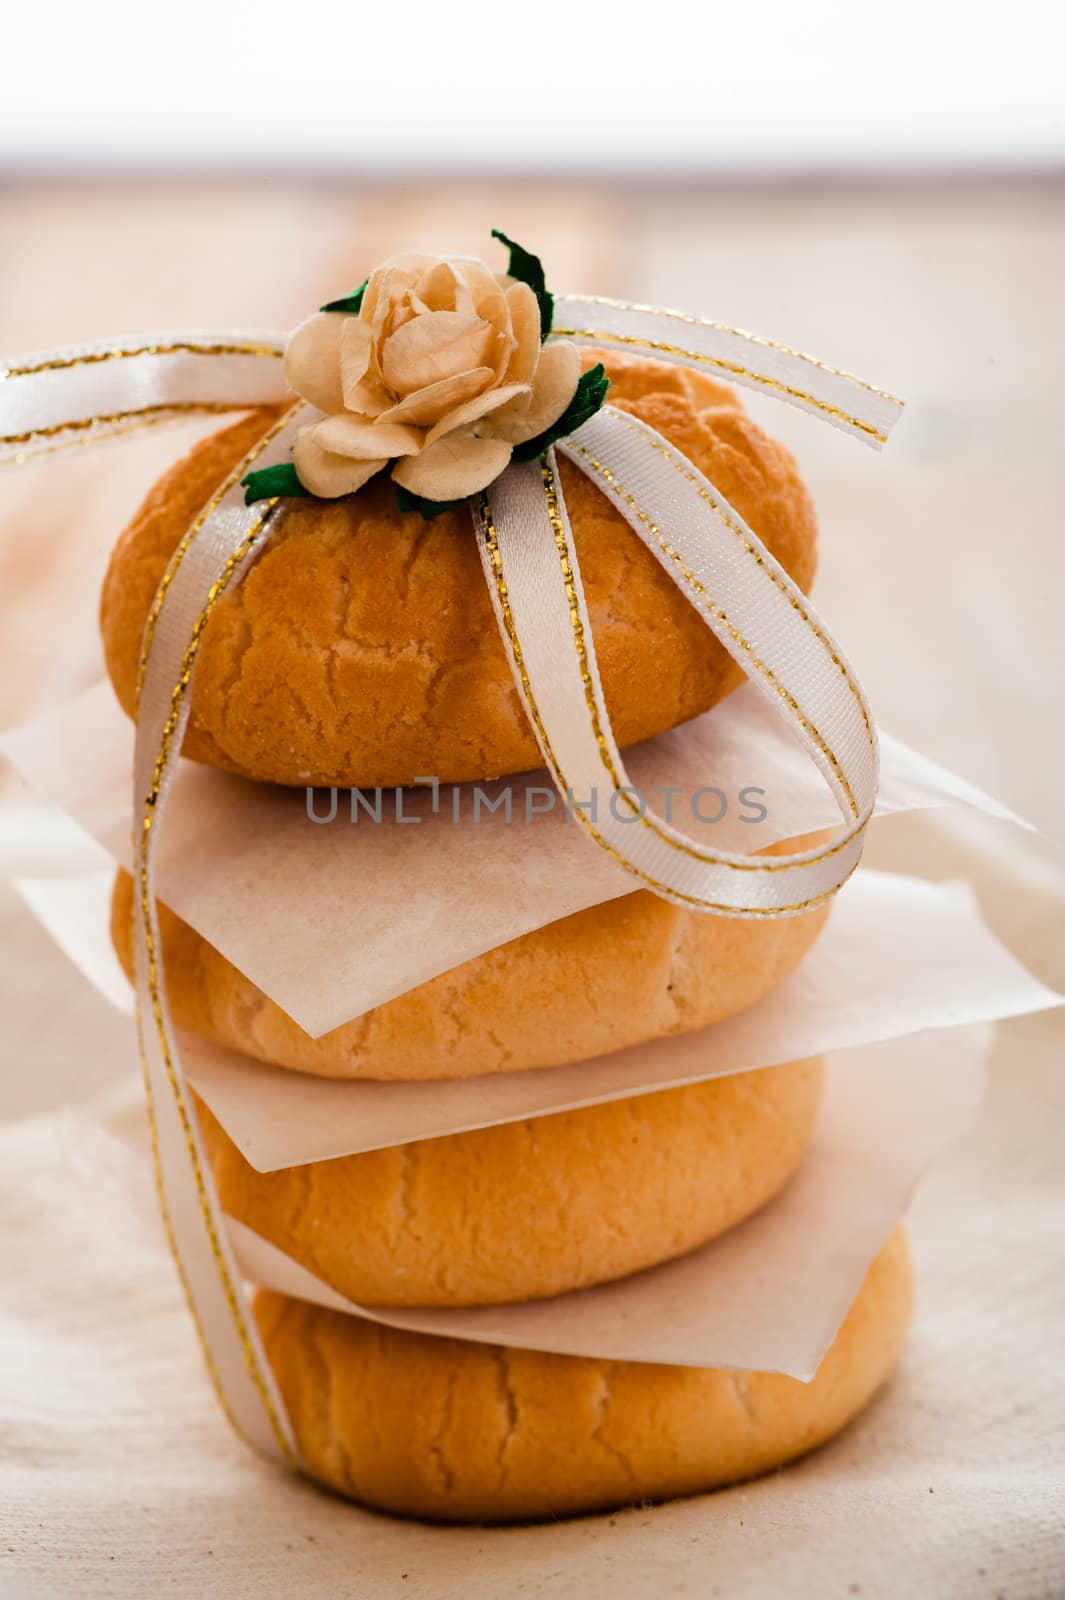 Vanilla cookies as present on napkin and wooden table